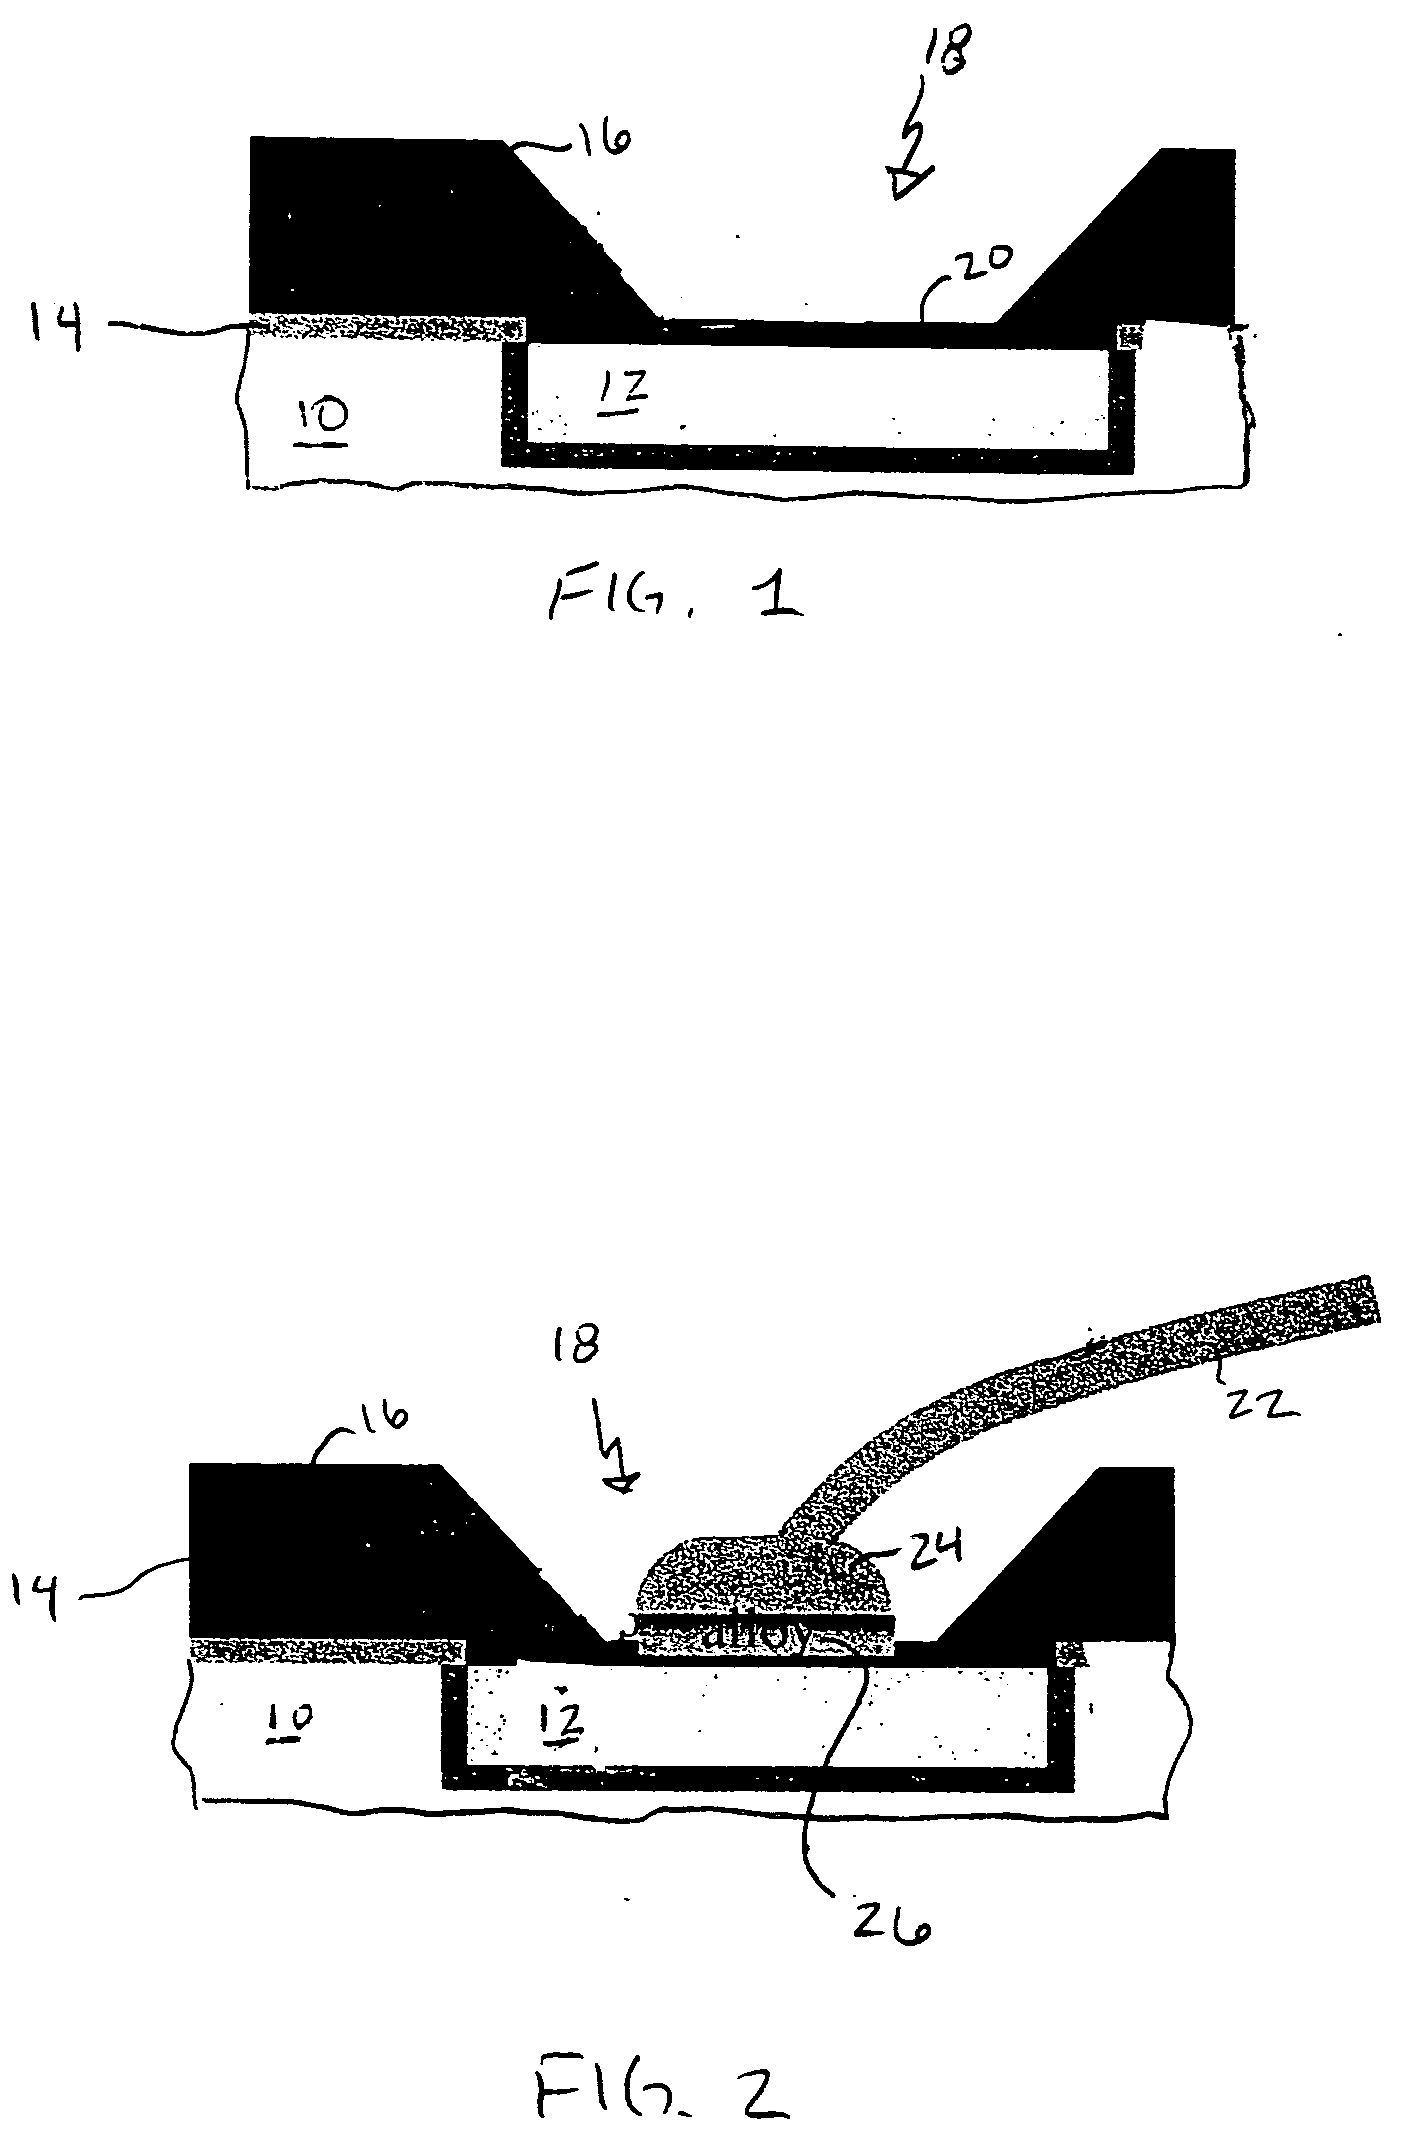 Apparatus and method for low pressure wirebond